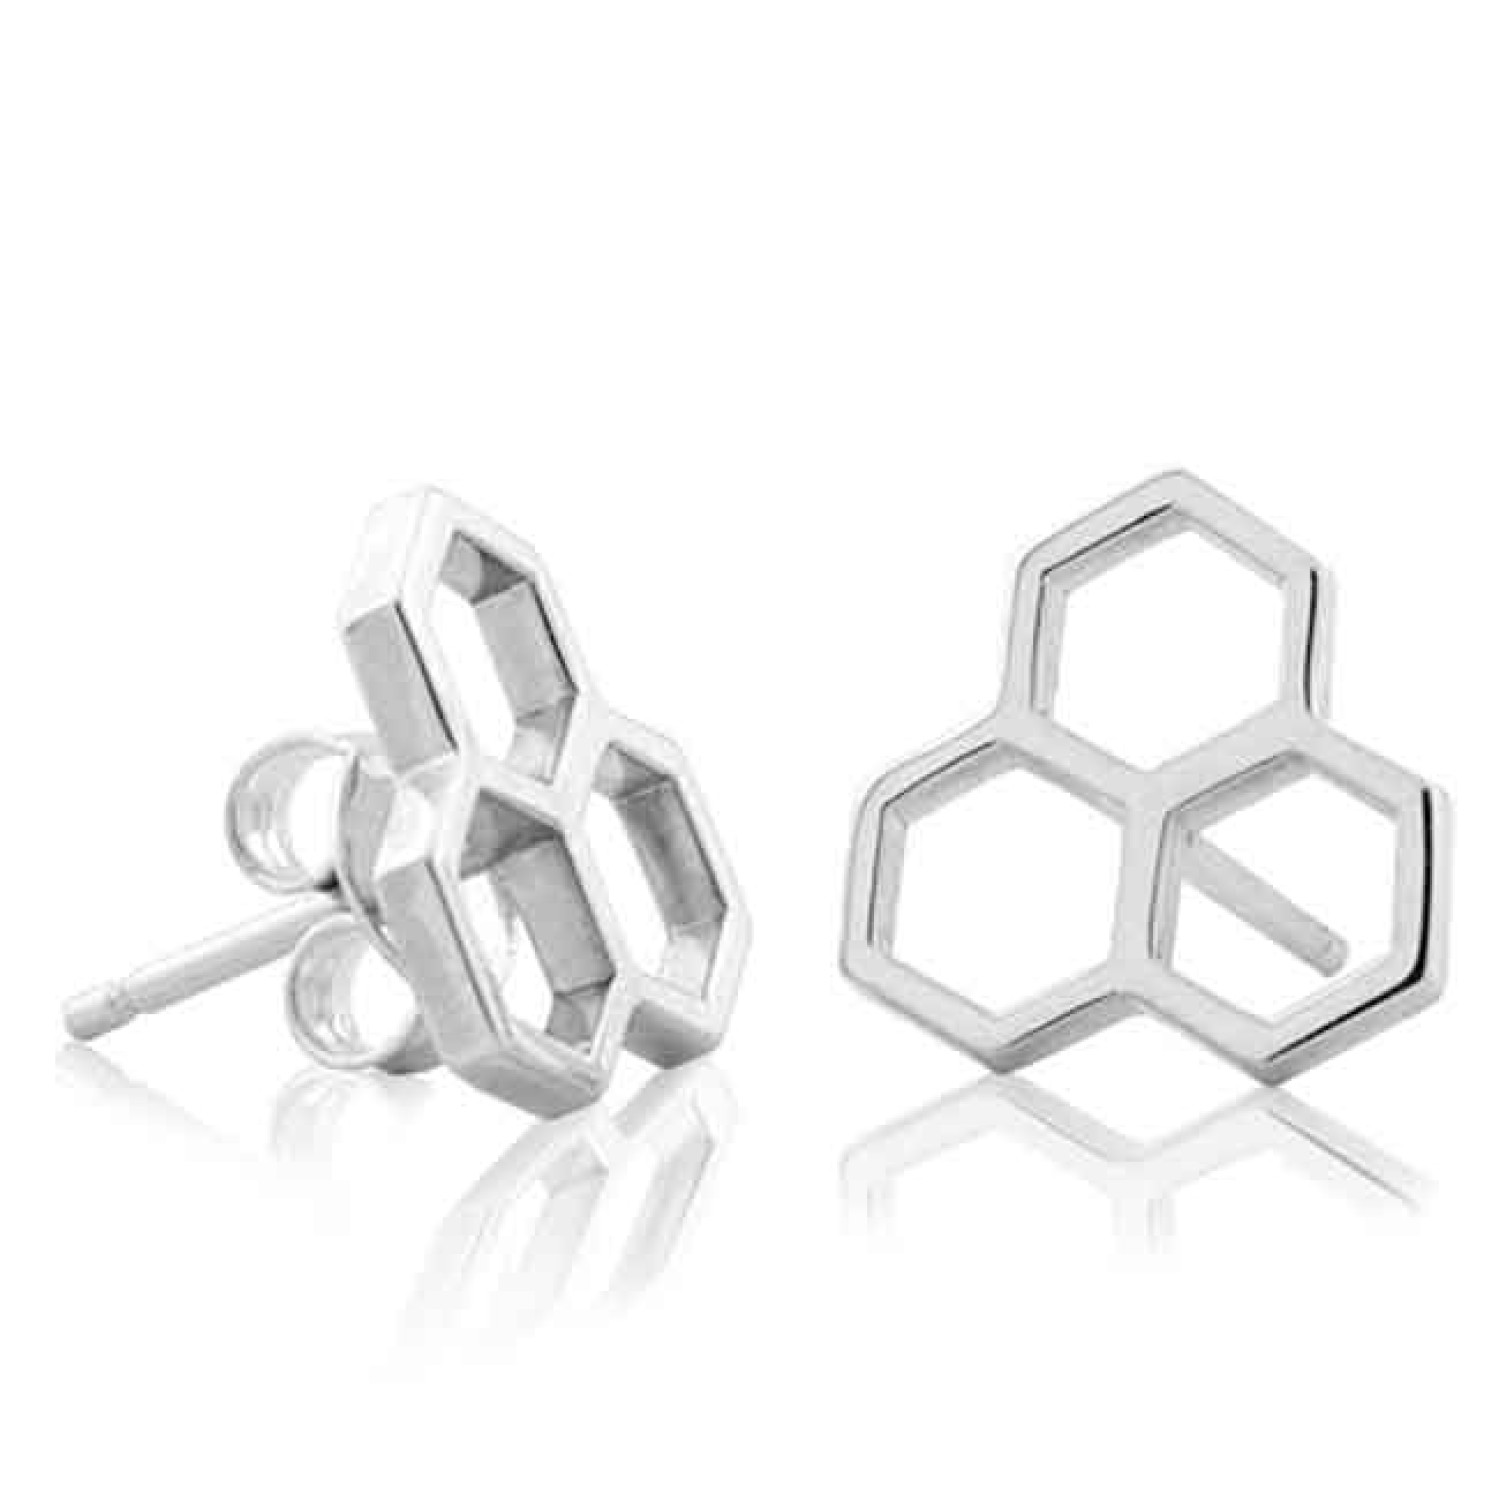 2E61006 Evolve NZ Honeycomb Stud Earrings. The New Zealand manuka honeycomb is known for its unique and special healing properties. These special studs represent health and vitality, strengthening our personal resolve. Available in store at Christies or o